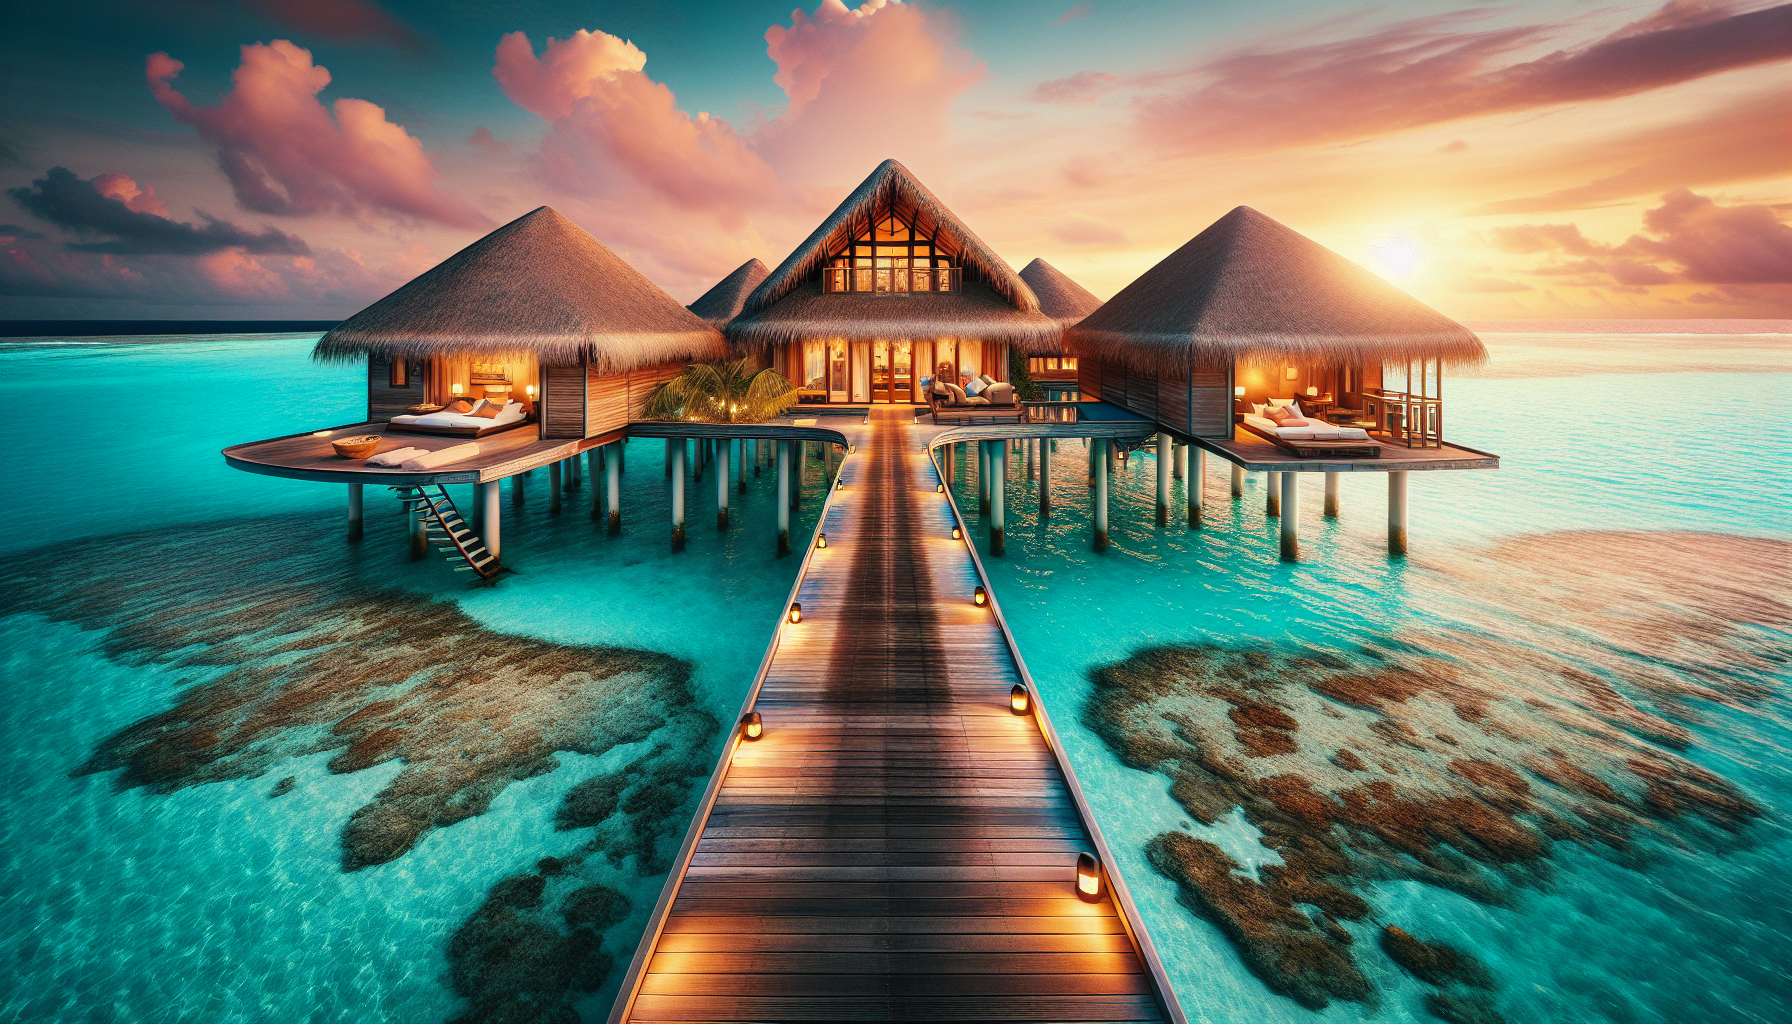 discover the most romantic getaways in the maldives and find the perfect destination for your vacation with our guide on where to go on vacation.